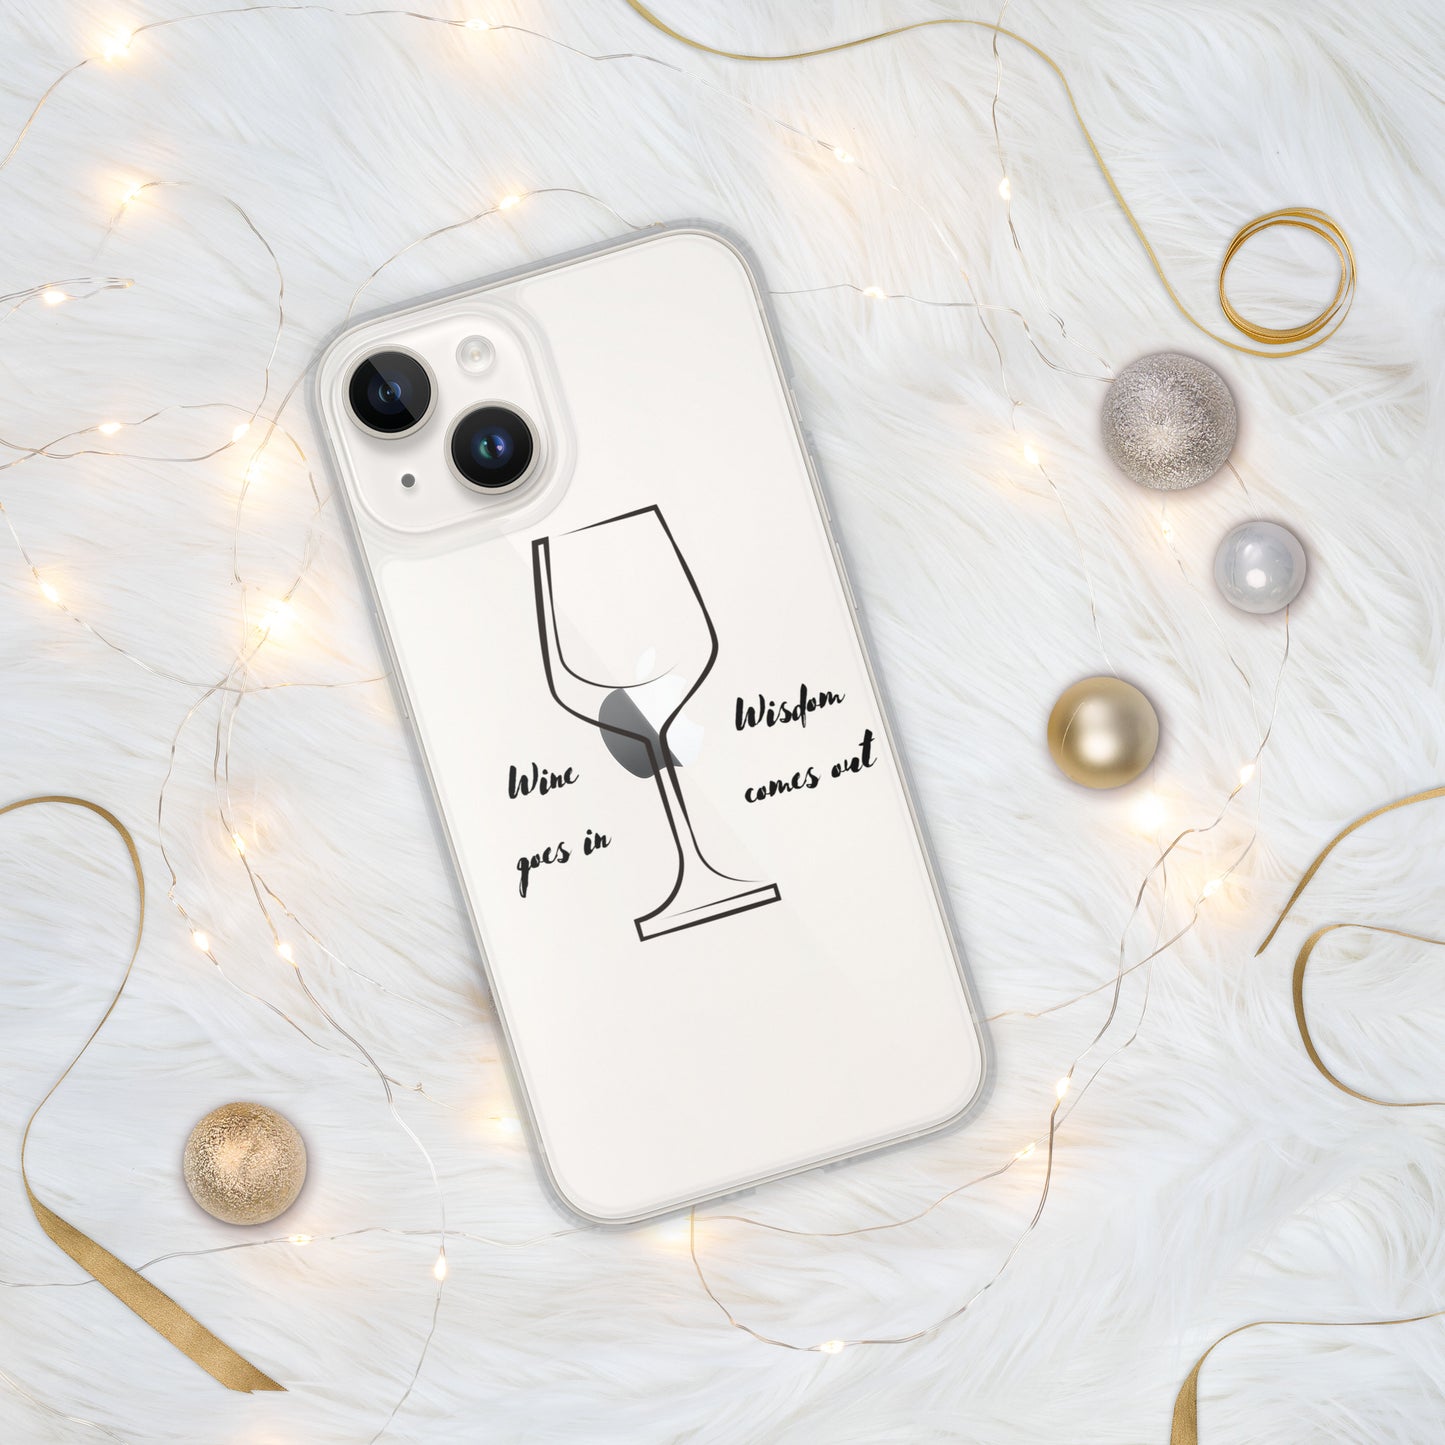 Wine goes in Wisdom comes out - iPhone Case